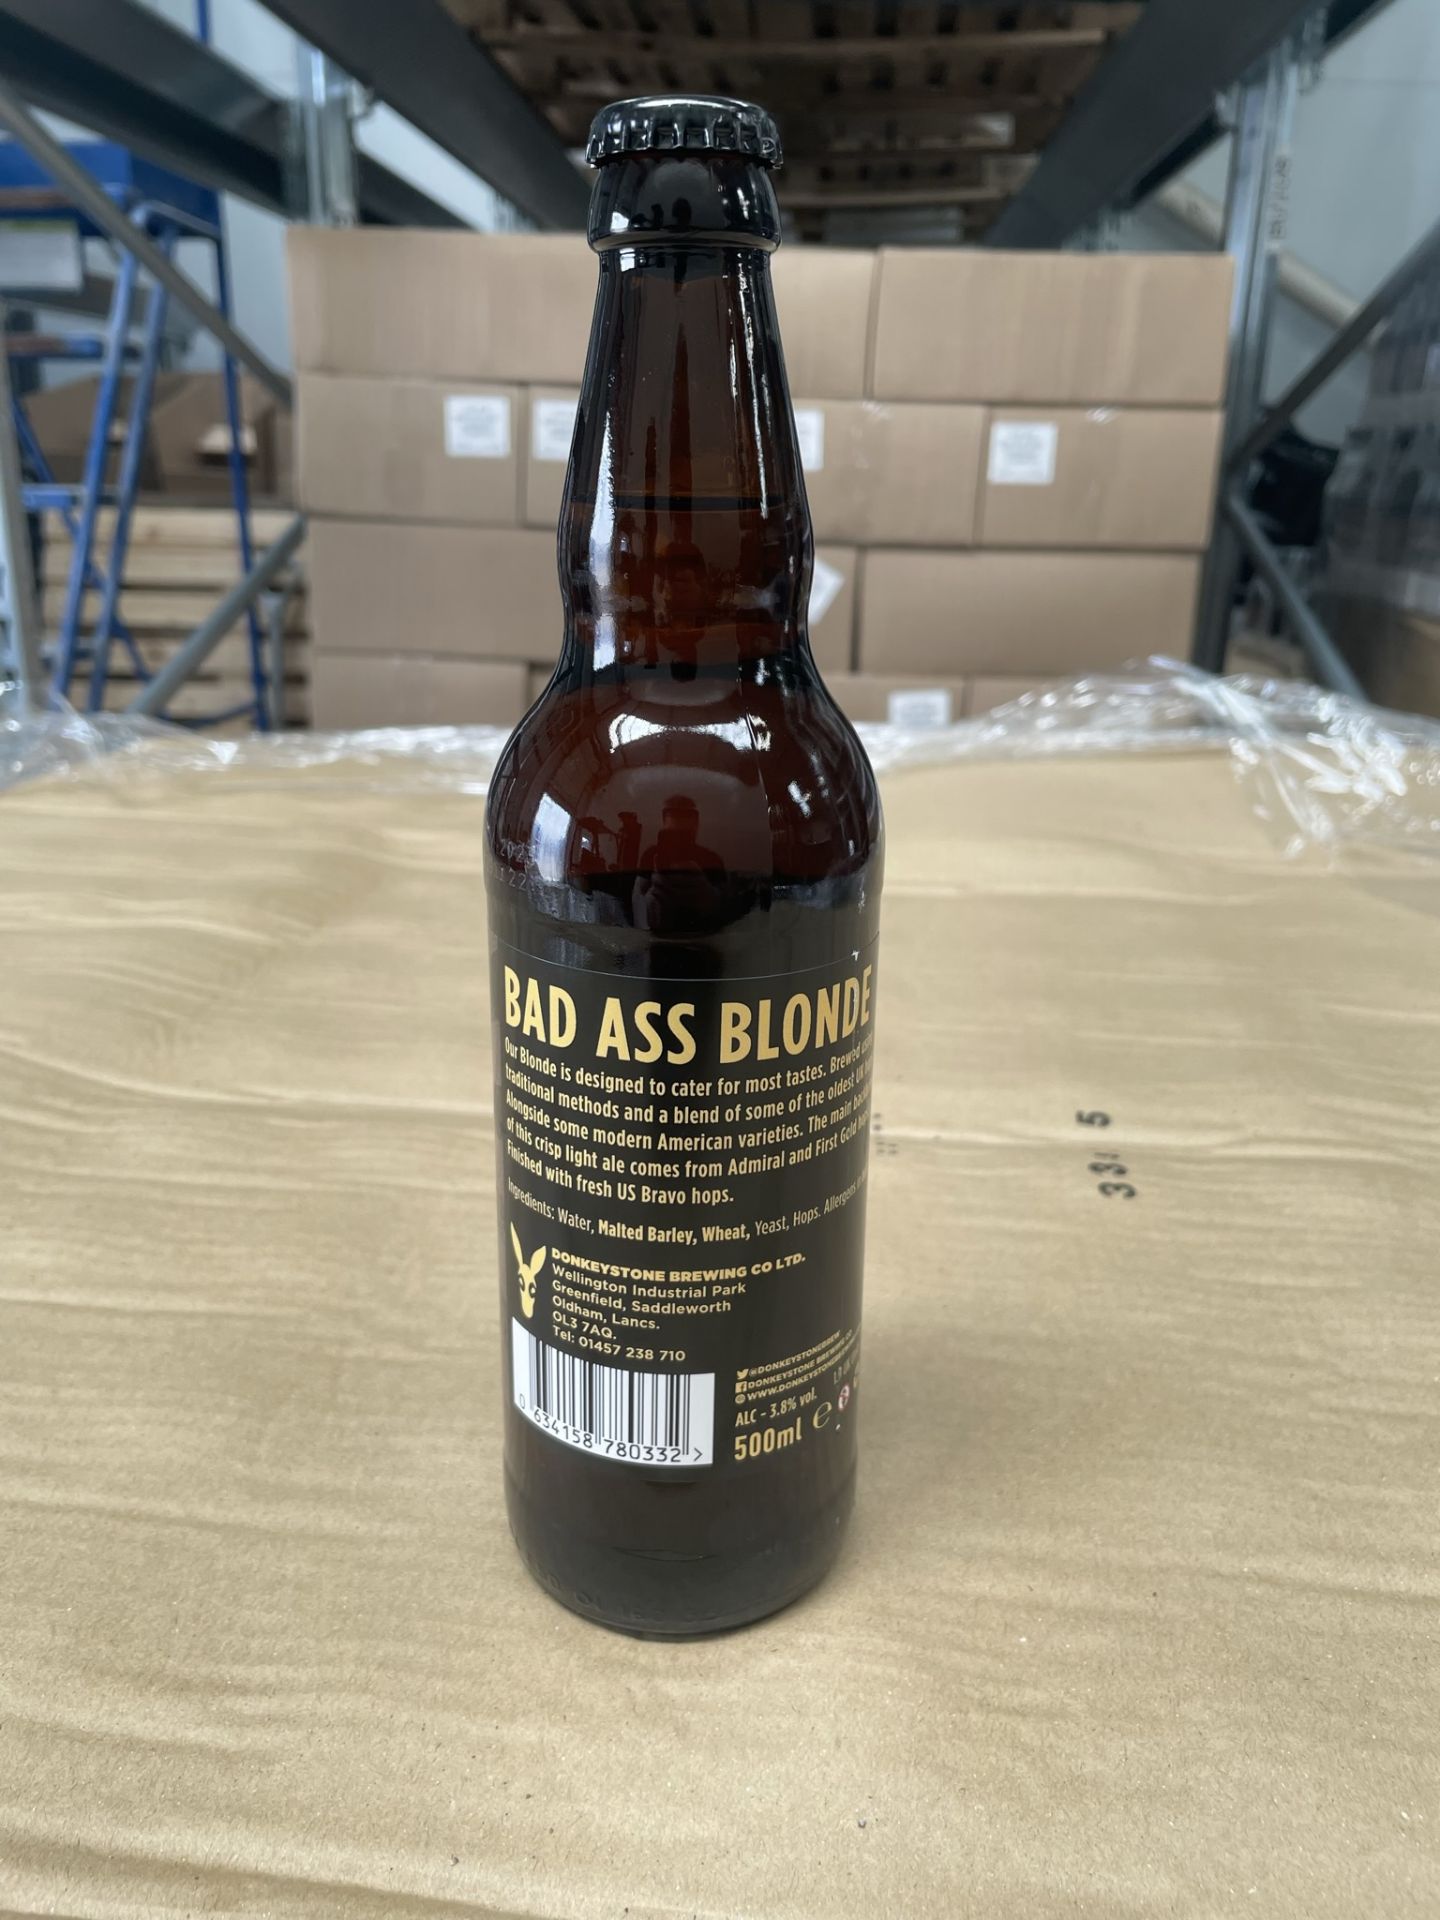 Approximately 864 x 500ml Bottles of DonkeyStone Brewing Co 'Bad Ass Blonde' Blone Ale | BB: Nov 202 - Image 2 of 3